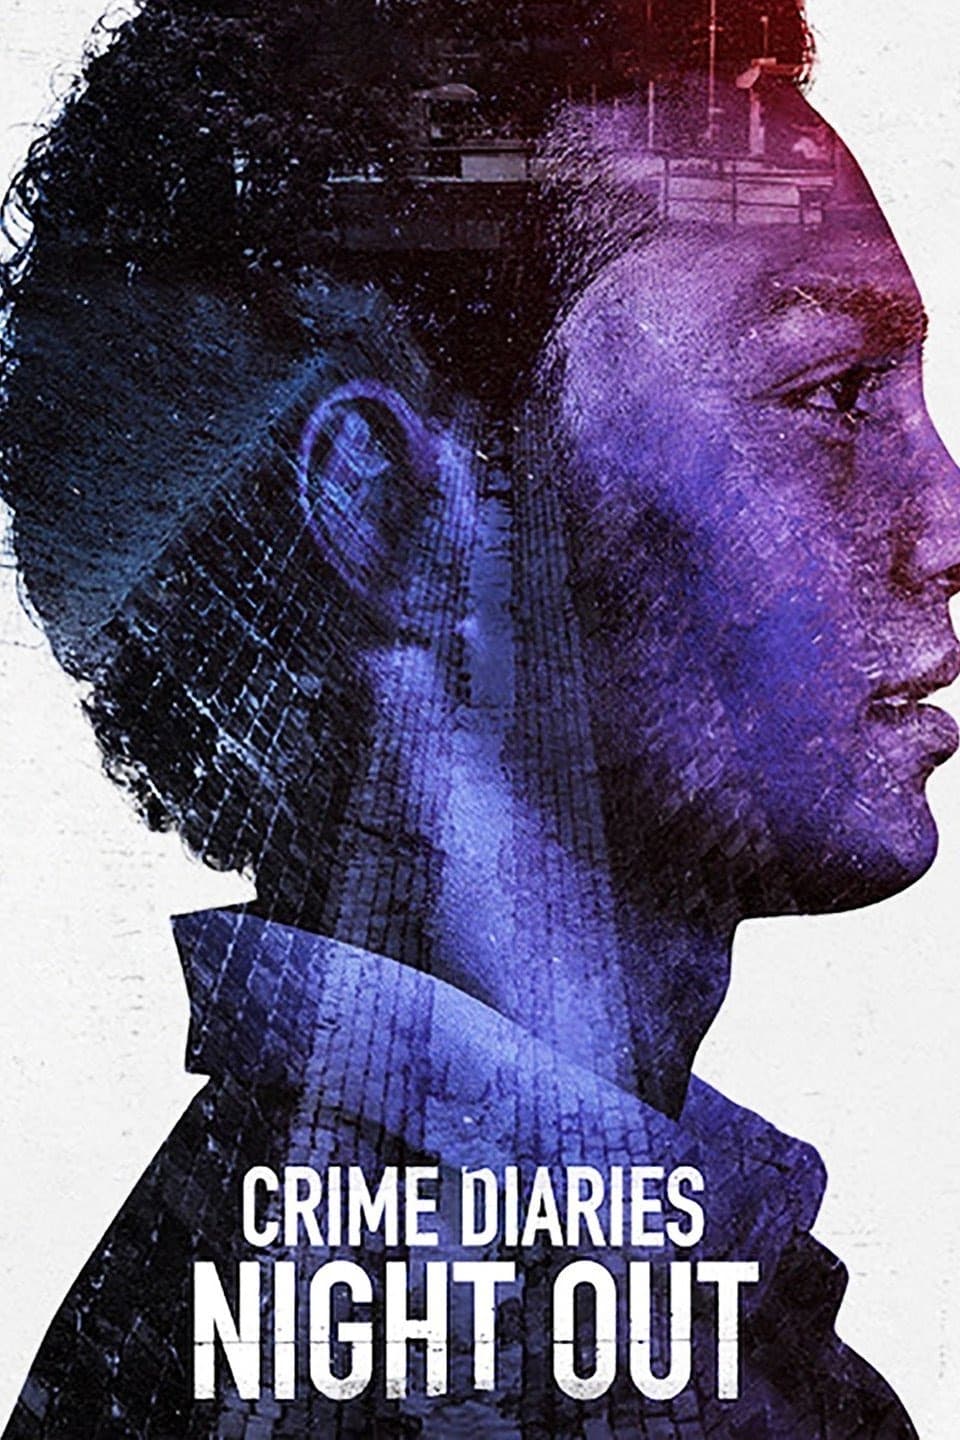 Crime Diaries: Night Out (2019)